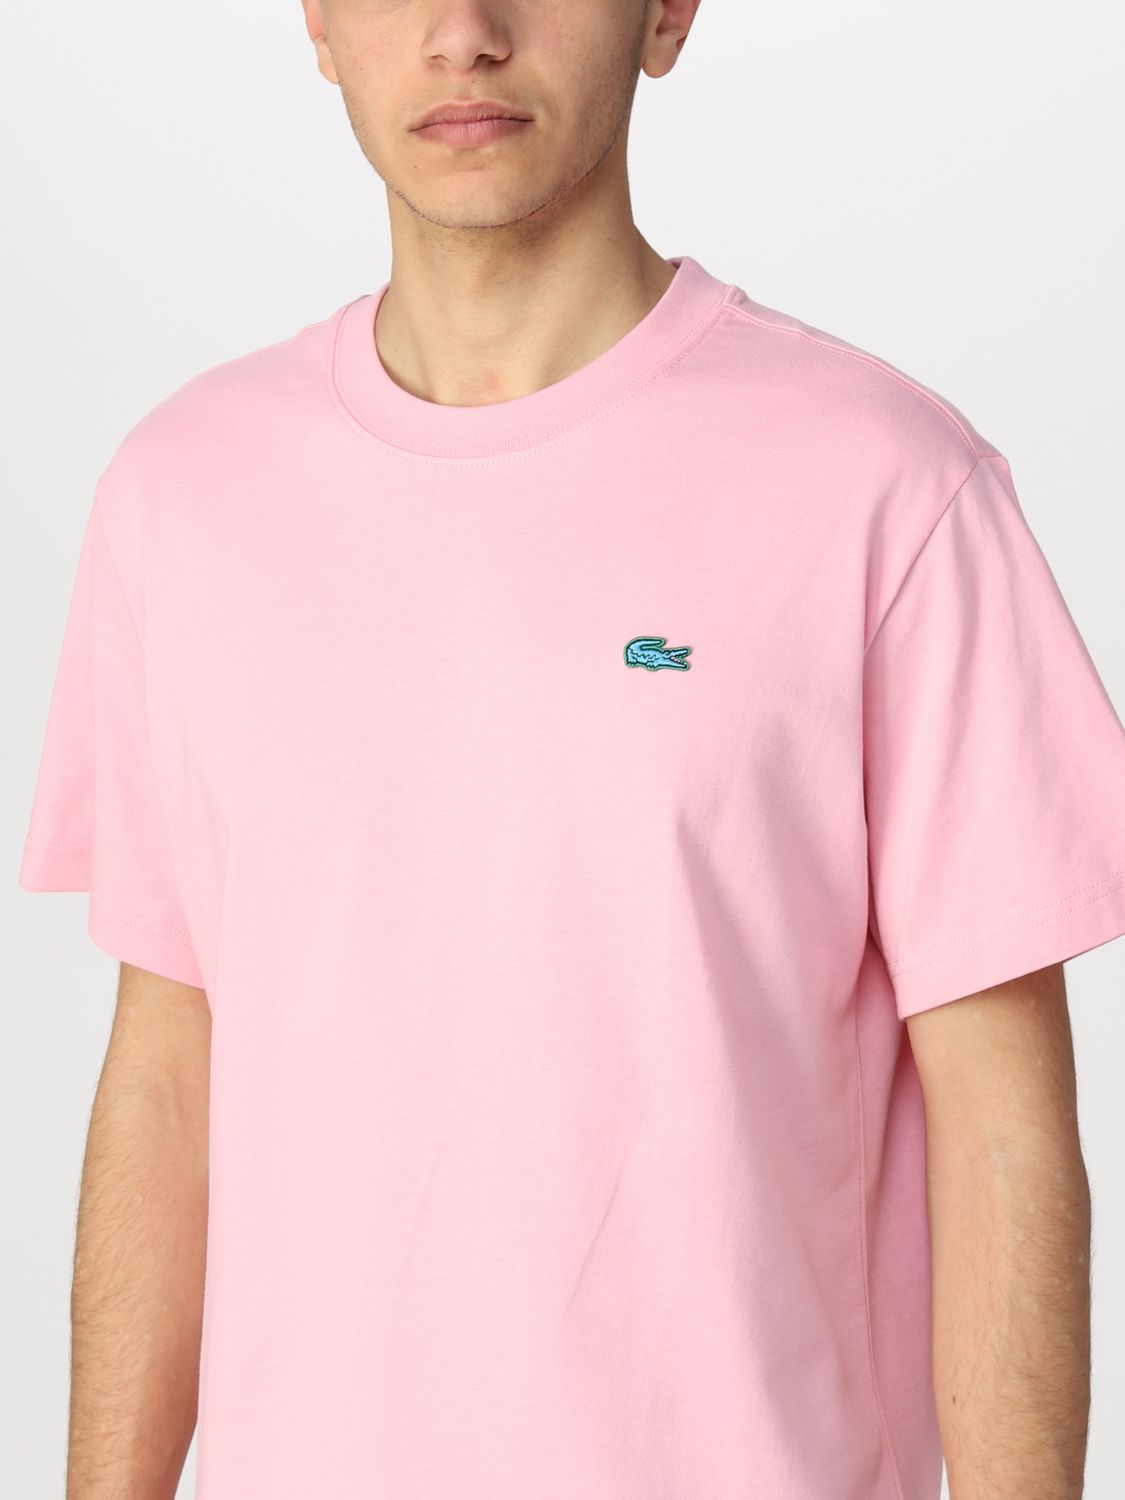 T-shirt Lacoste L!Ve: Lacoste L! Ve t-shirt in cotton with logo pink 3